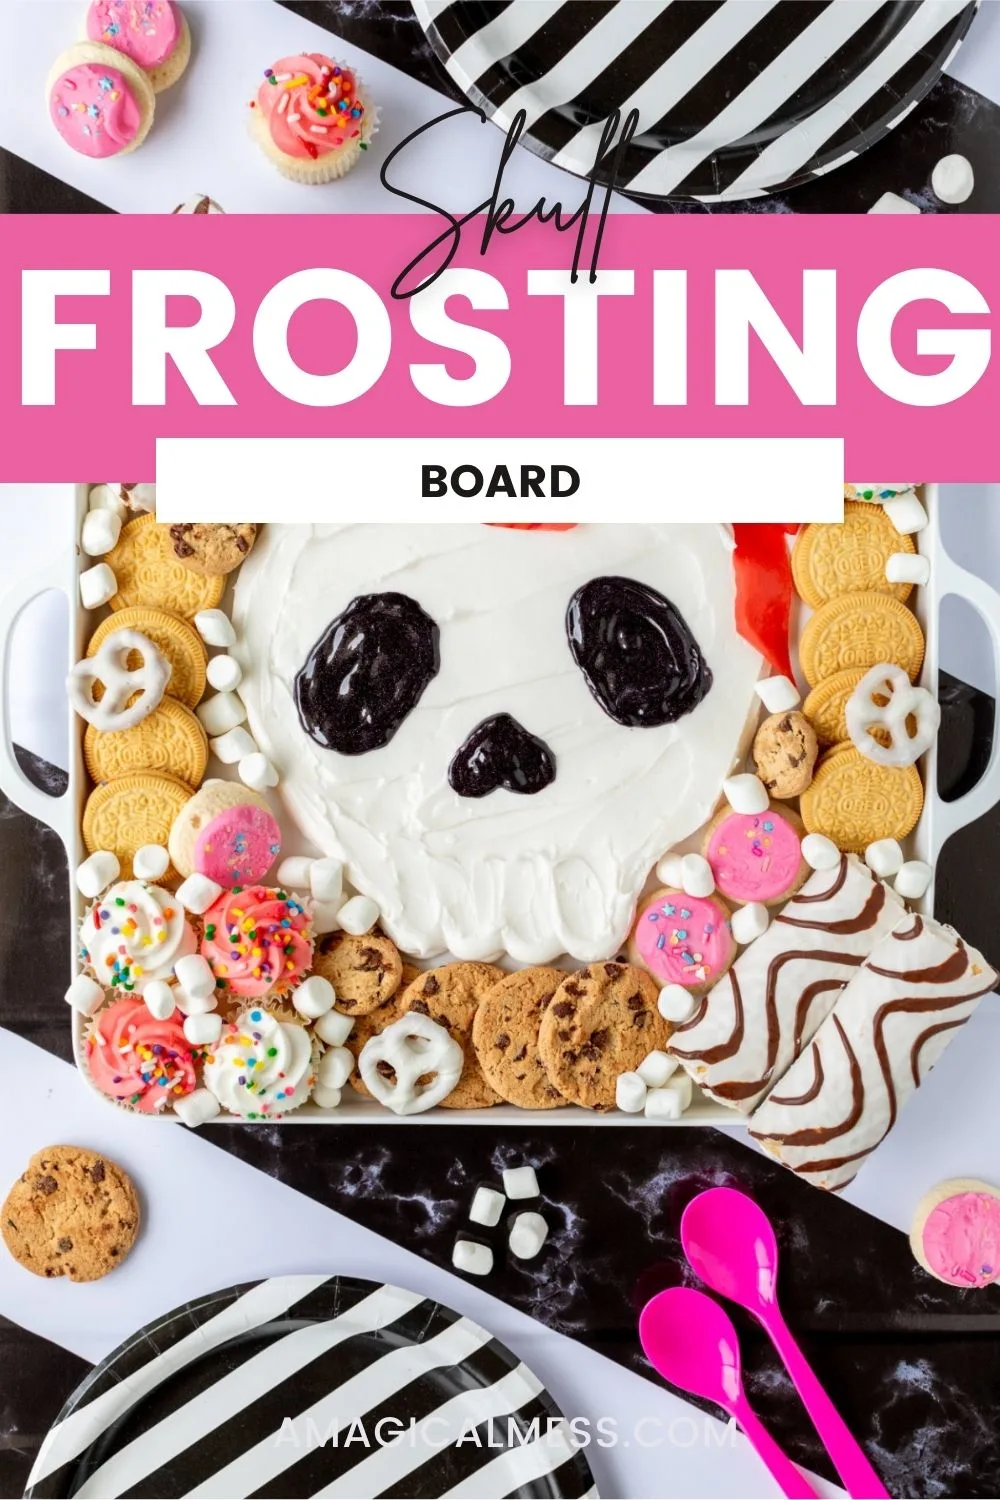 Halloween sugar skull buttercream board with cakes and cookies on a striped background. 